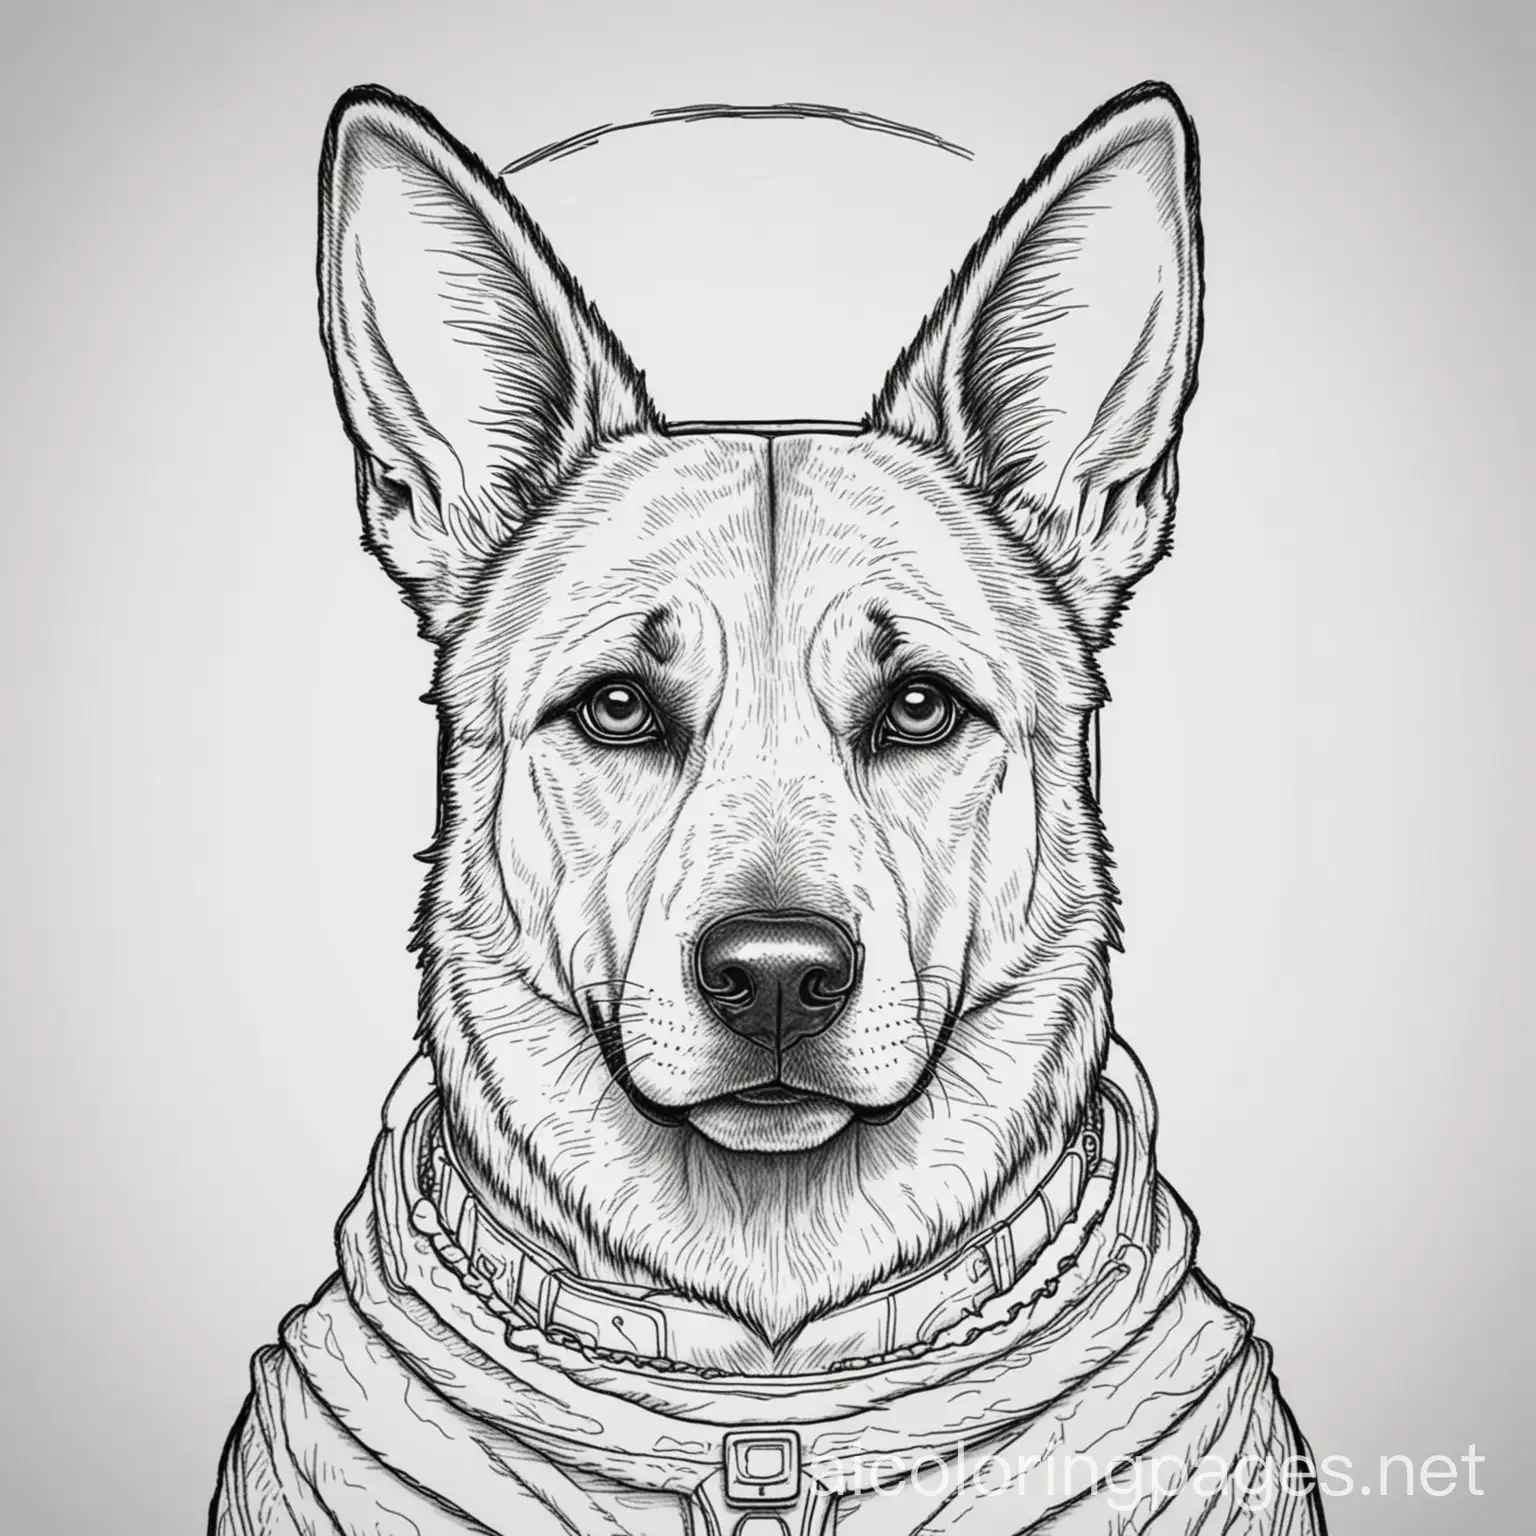 alien german shepard coloring page, Coloring Page, black and white, line art, white background, Simplicity, Ample White Space. The background of the coloring page is plain white to make it easy for young children to color within the lines. The outlines of all the subjects are easy to distinguish, making it simple for kids to color without too much difficulty